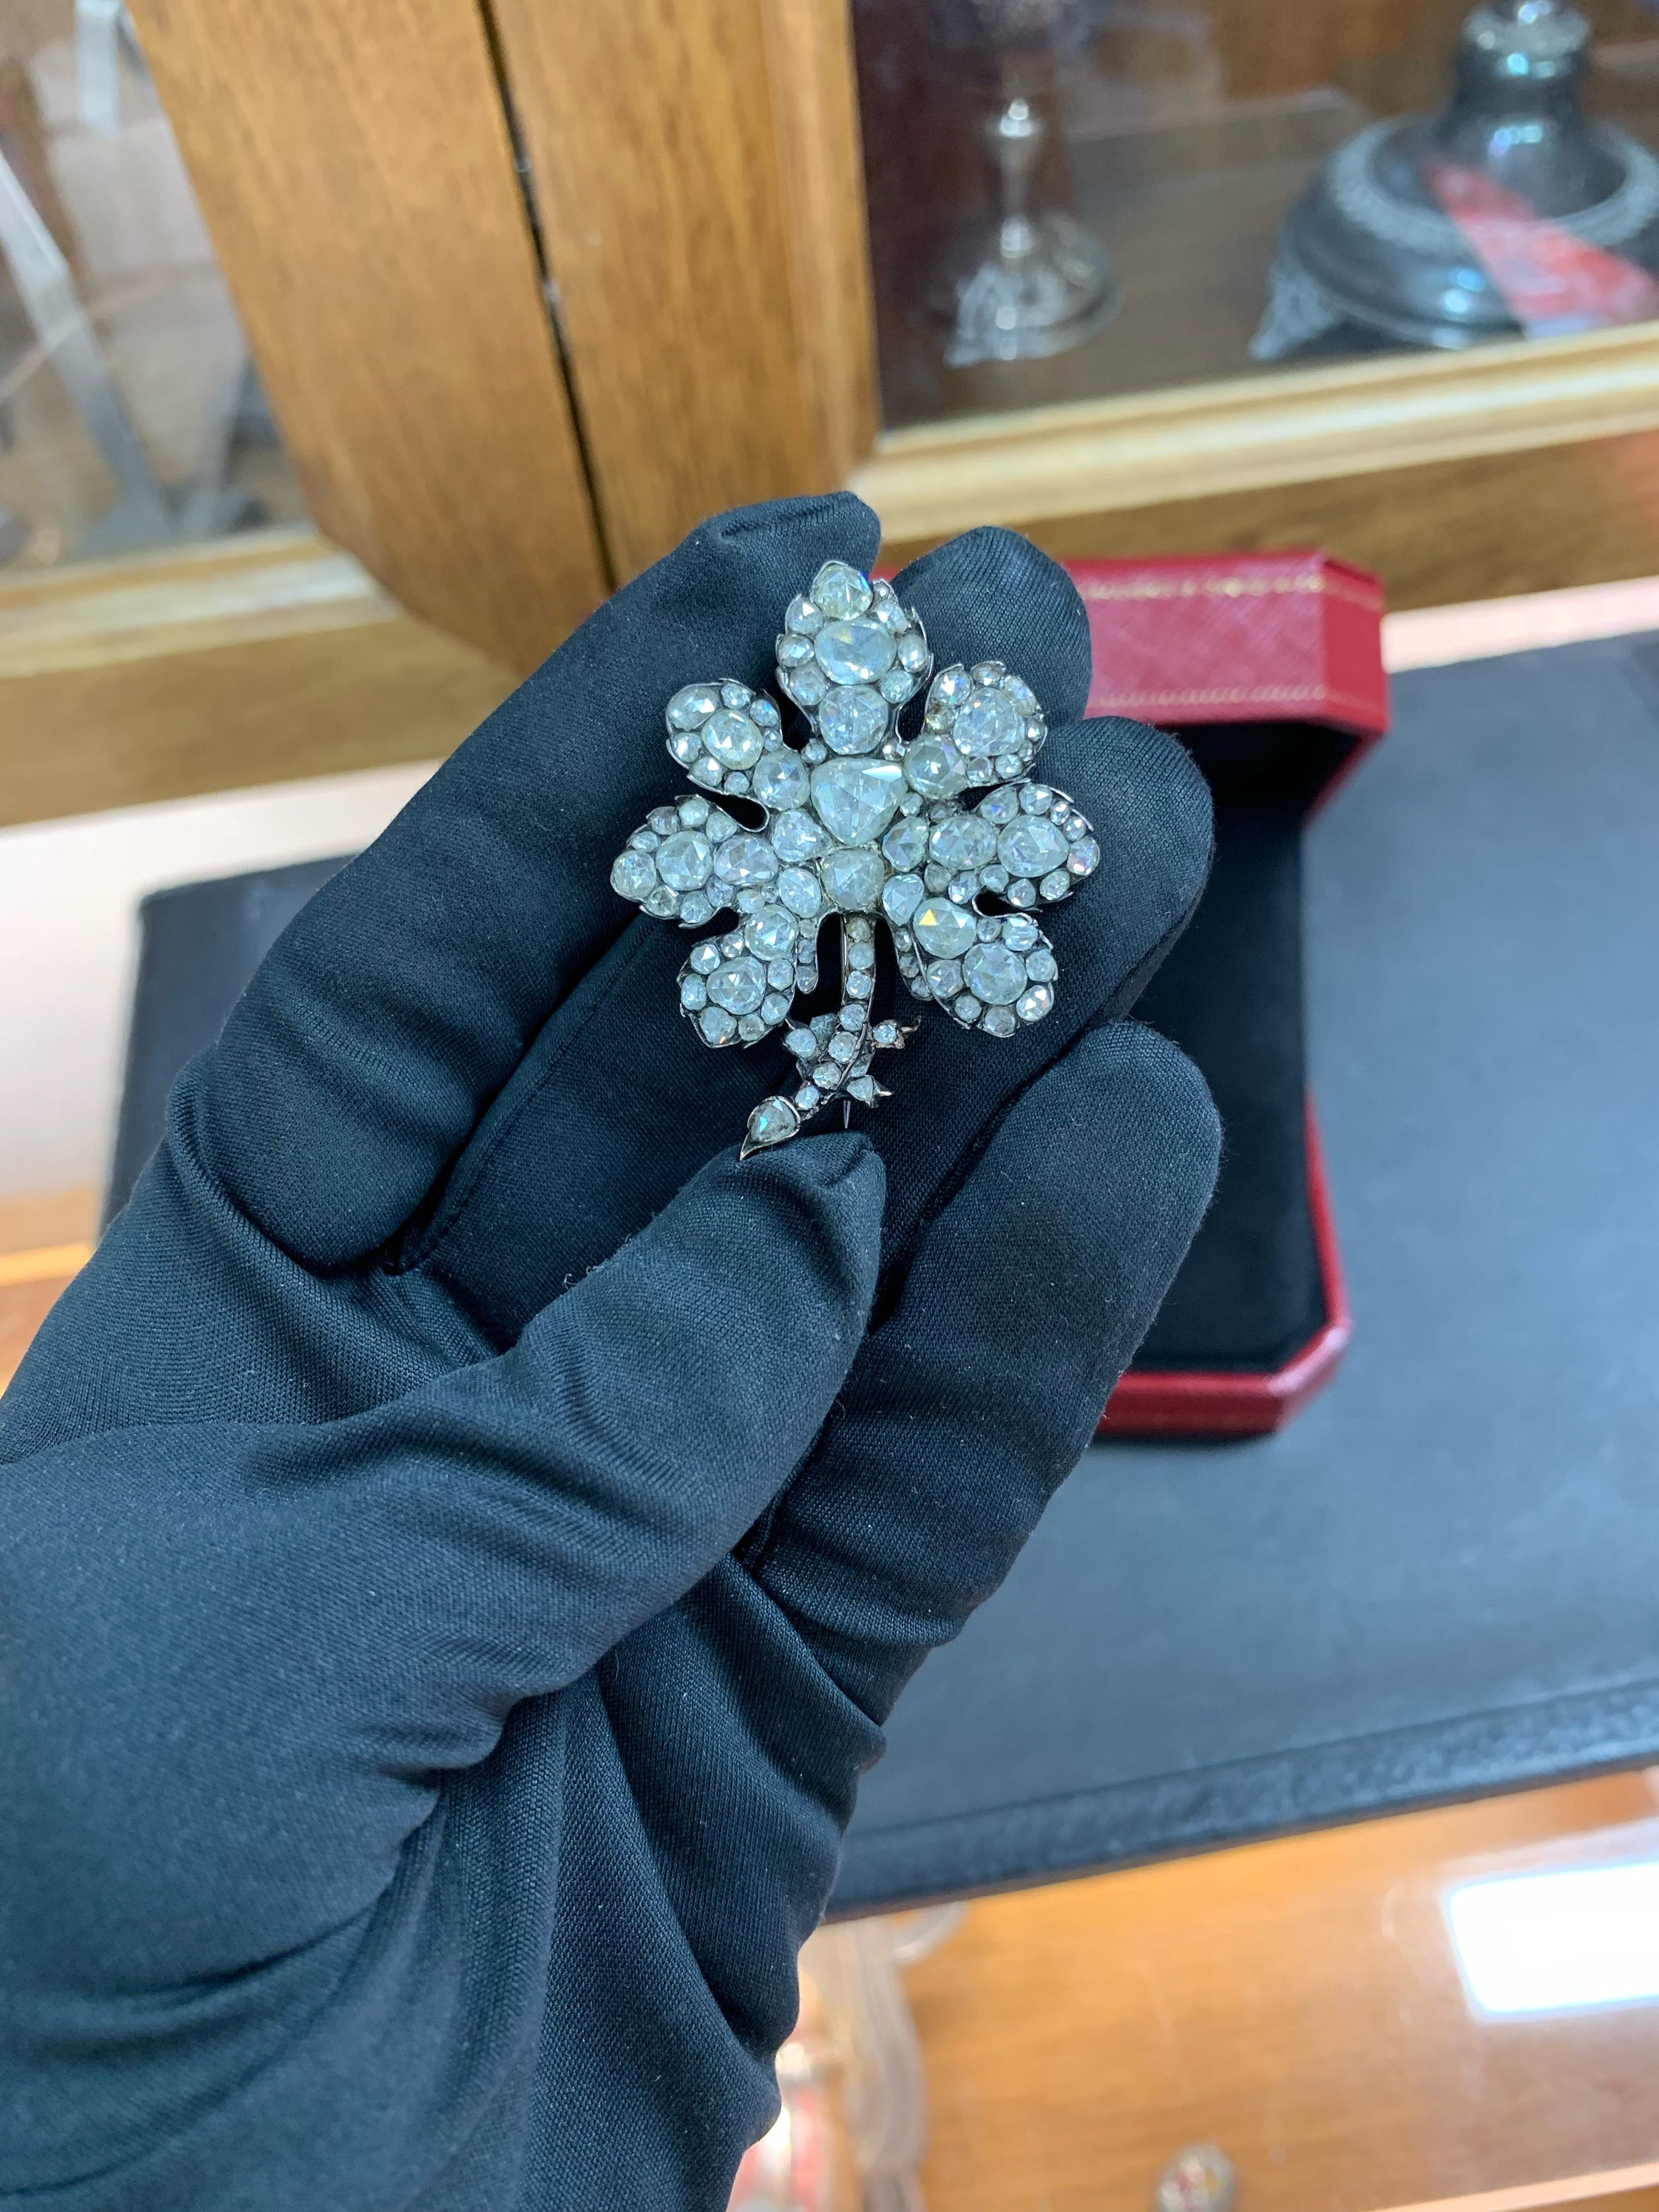 Beautifully Hand Crafted Antique Rose Cut Diamond Brooch From The Late 1800’s Set in Sterling Silver With a Touch Of Gold.
Amazing Shine, Incredible Craftsmanship, Unbelievable Work Of Art.
Great Statement Piece.
Approximately 10.0+ Carats Of